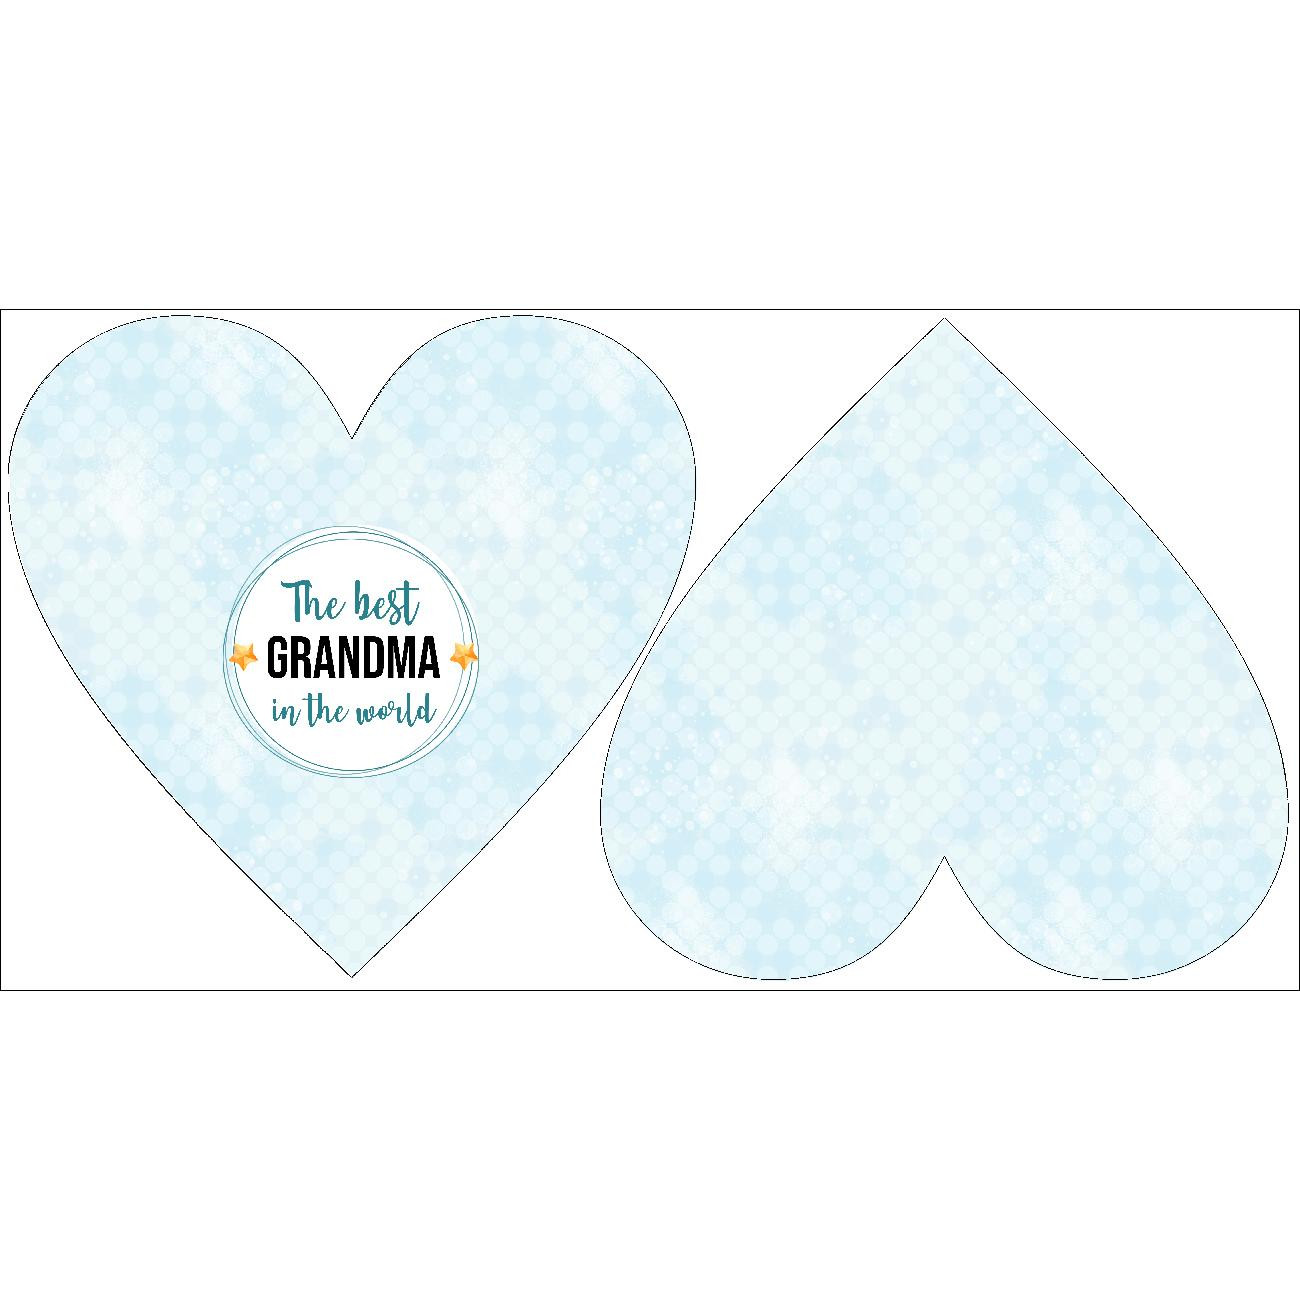 DECORATIVE PILLOW HEART - The best grandmother in the world / HOARFROST 